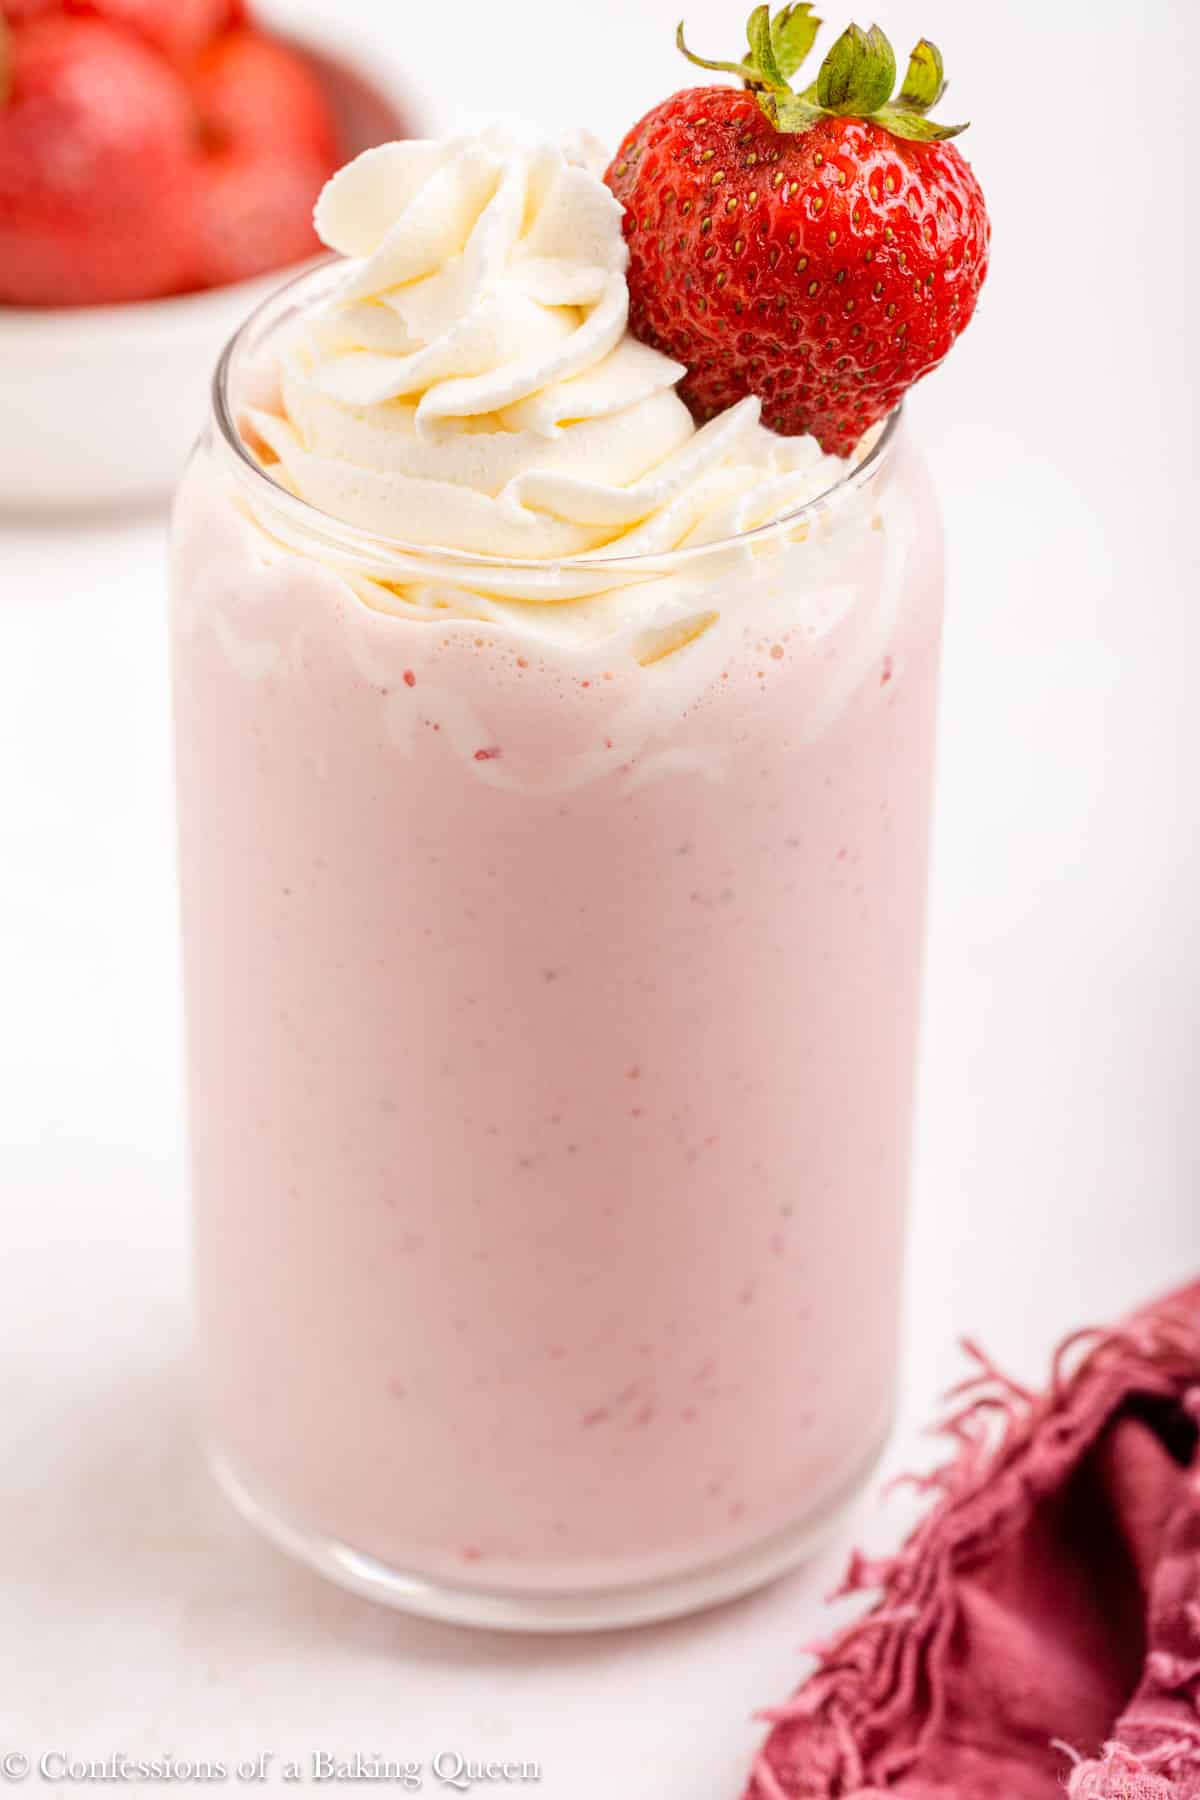 strawberry milk shake with whipped cream in a glass on a light surface with a pink linen and bowl of strawberries